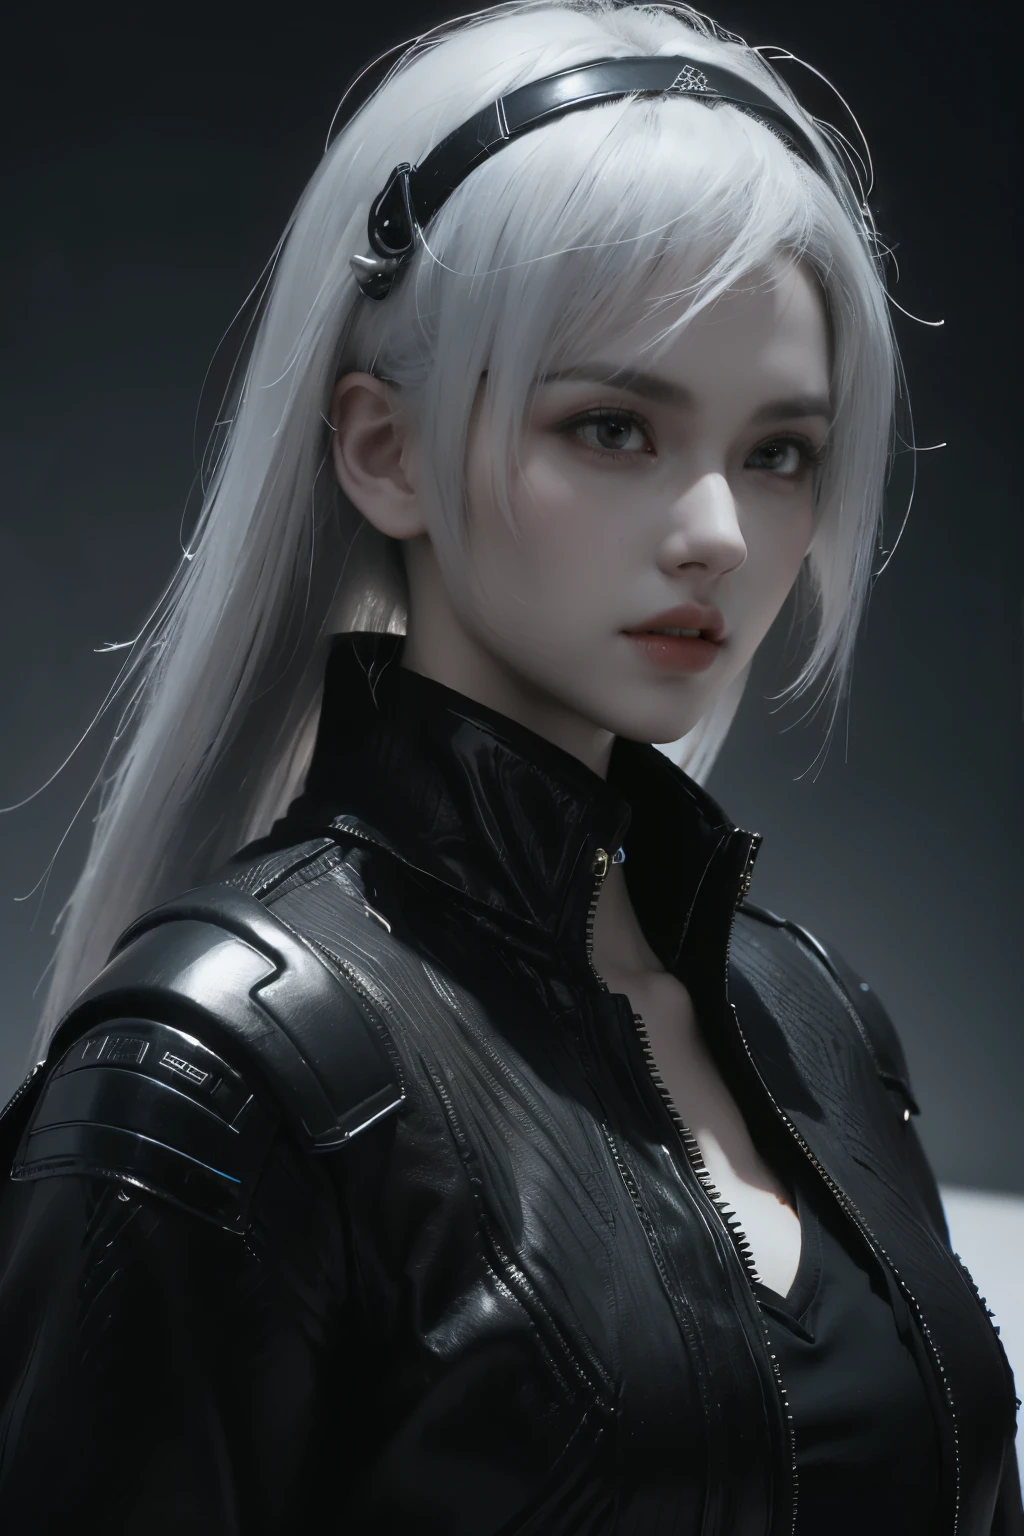 Game art，The best picture quality，Highest resolution，8K，((A bust photograph))，((Portrait))，((Head close-up))，(Rule of thirds)，Unreal Engine 5 rendering works， (The Girl of the Future)，(Female Warrior)， 22-year-old girl，(Female hackers)，(White hair，Ancient Oriental hairstyle)，((The pupils of the red eyes:1.3))，(A beautiful eye full of detail)，(Big breasts)，(Eye shadow)，Elegant and charming，indifferent，((Anger))，(Cyberpunk jacket full of futuristic look，Joint Armor，There are exquisite Chinese patterns on the clothes，A flash of jewellery)，Cyberpunk Characters，Future Style， Photo poses，City background，Movie lights，Ray tracing，Game CG，((3D Unreal Engine))，oc rendering reflection pattern